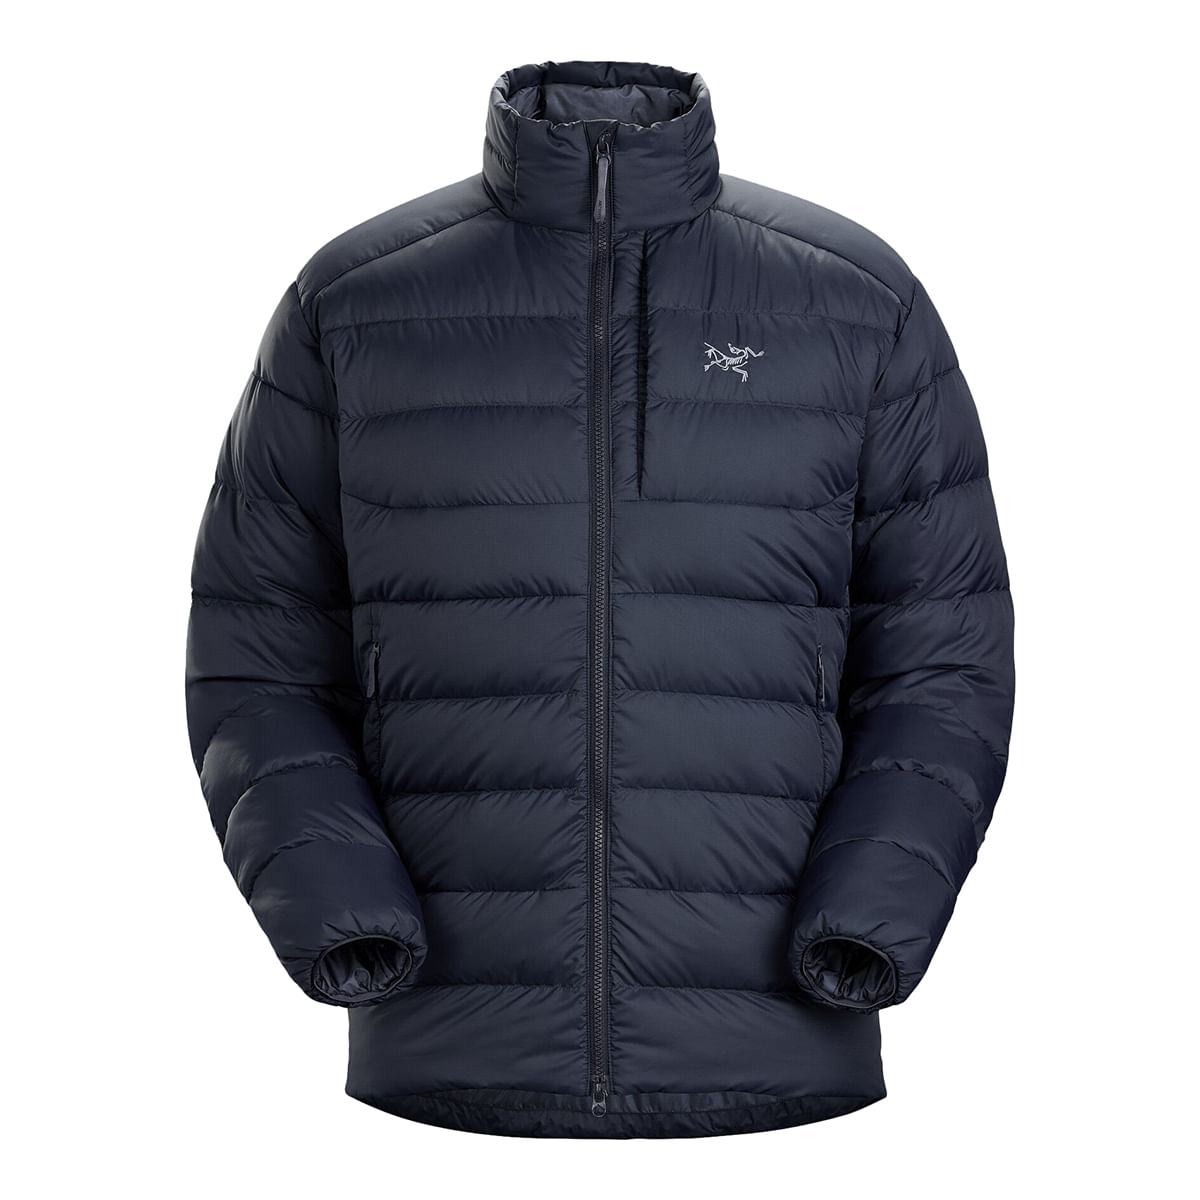 Arc'teryx Men's Thorium Jacket - Exceptional Warmth for Any Adventure ...